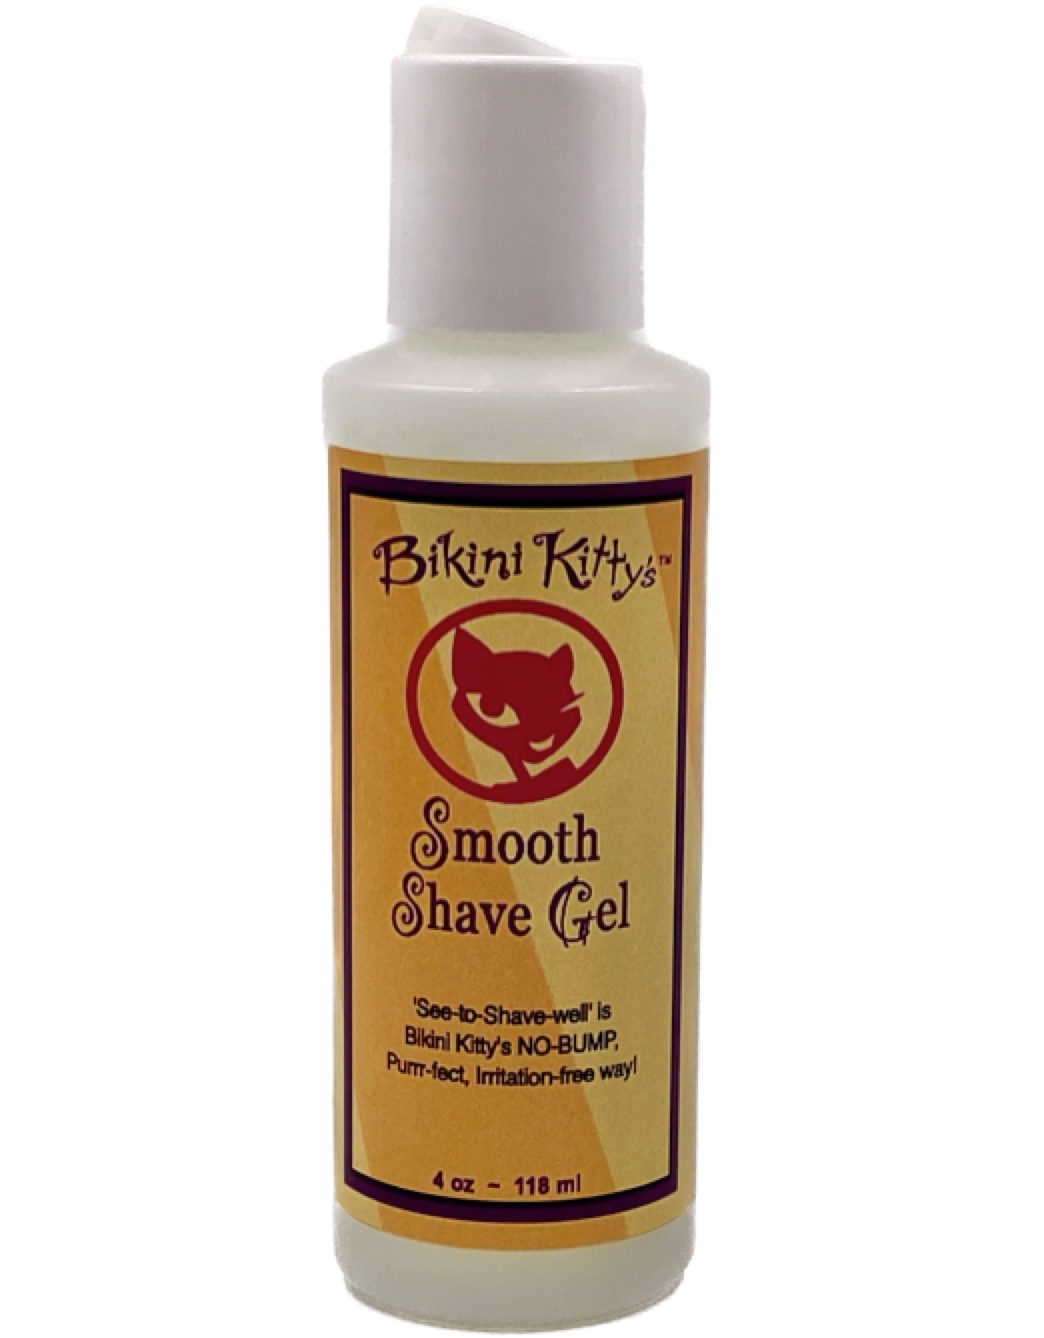 No foam See-to-Shave gel with excellent glide and not clogging formula